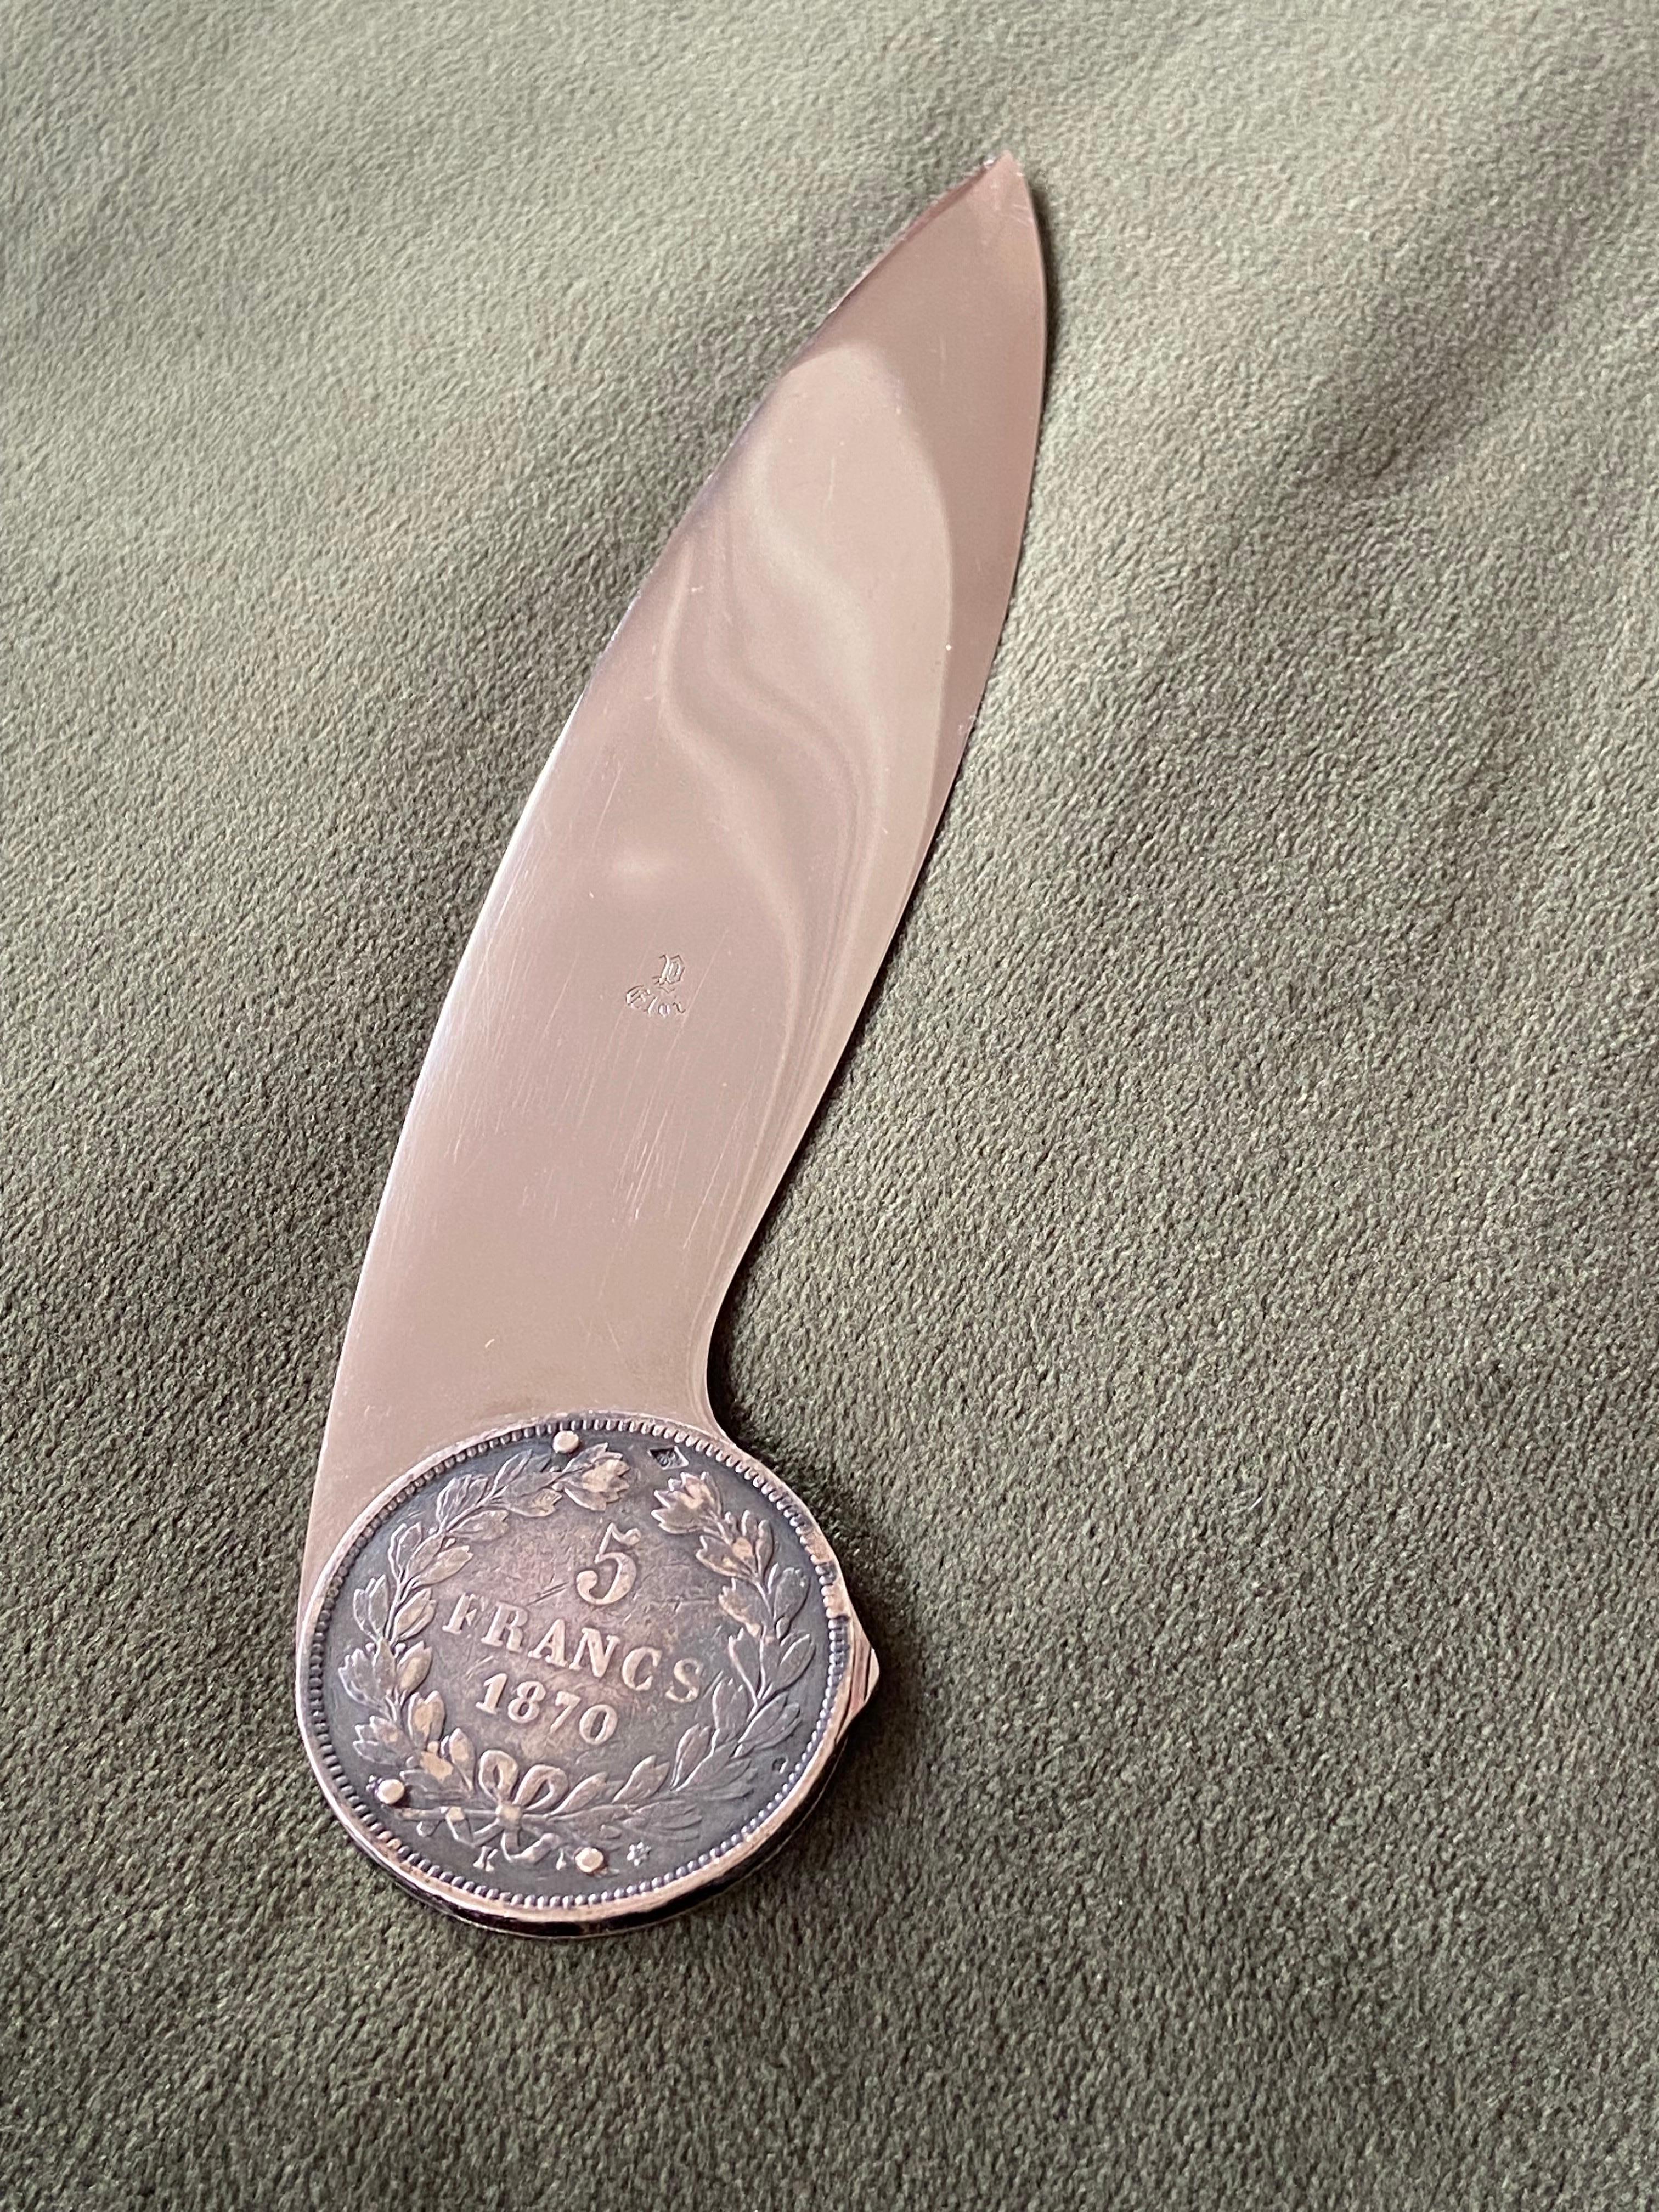 French metal letter opener with silver five franks coin on the top.
There is a mark US AF on the one side of the blade.
Very good condition.
France, circa 1920